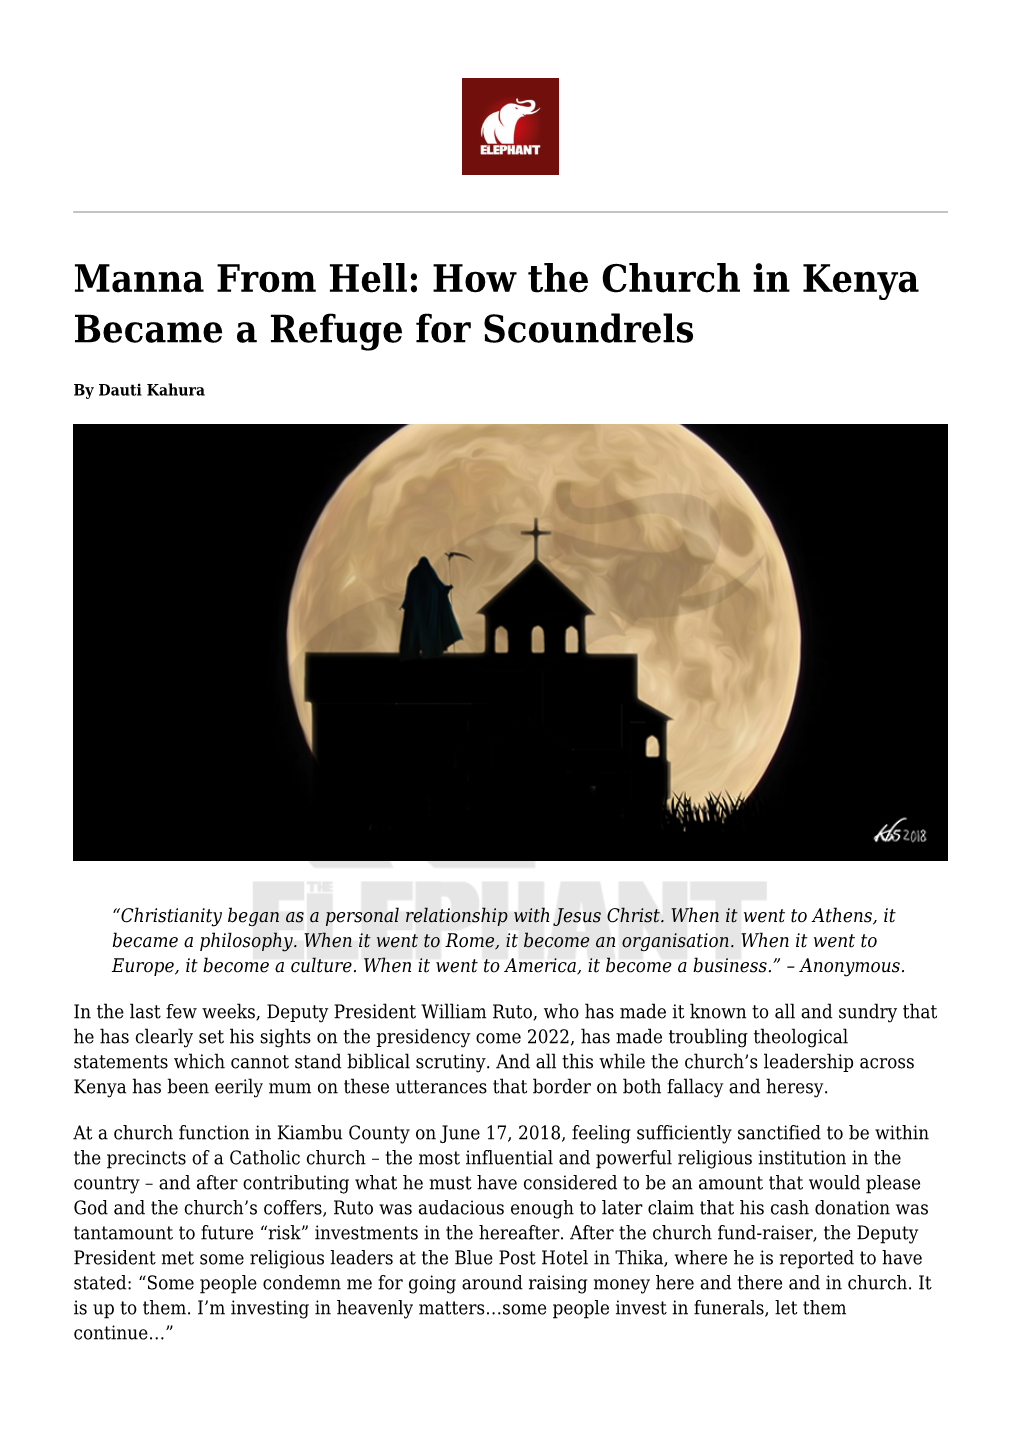 Manna from Hell: How the Church in Kenya Became a Refuge for Scoundrels